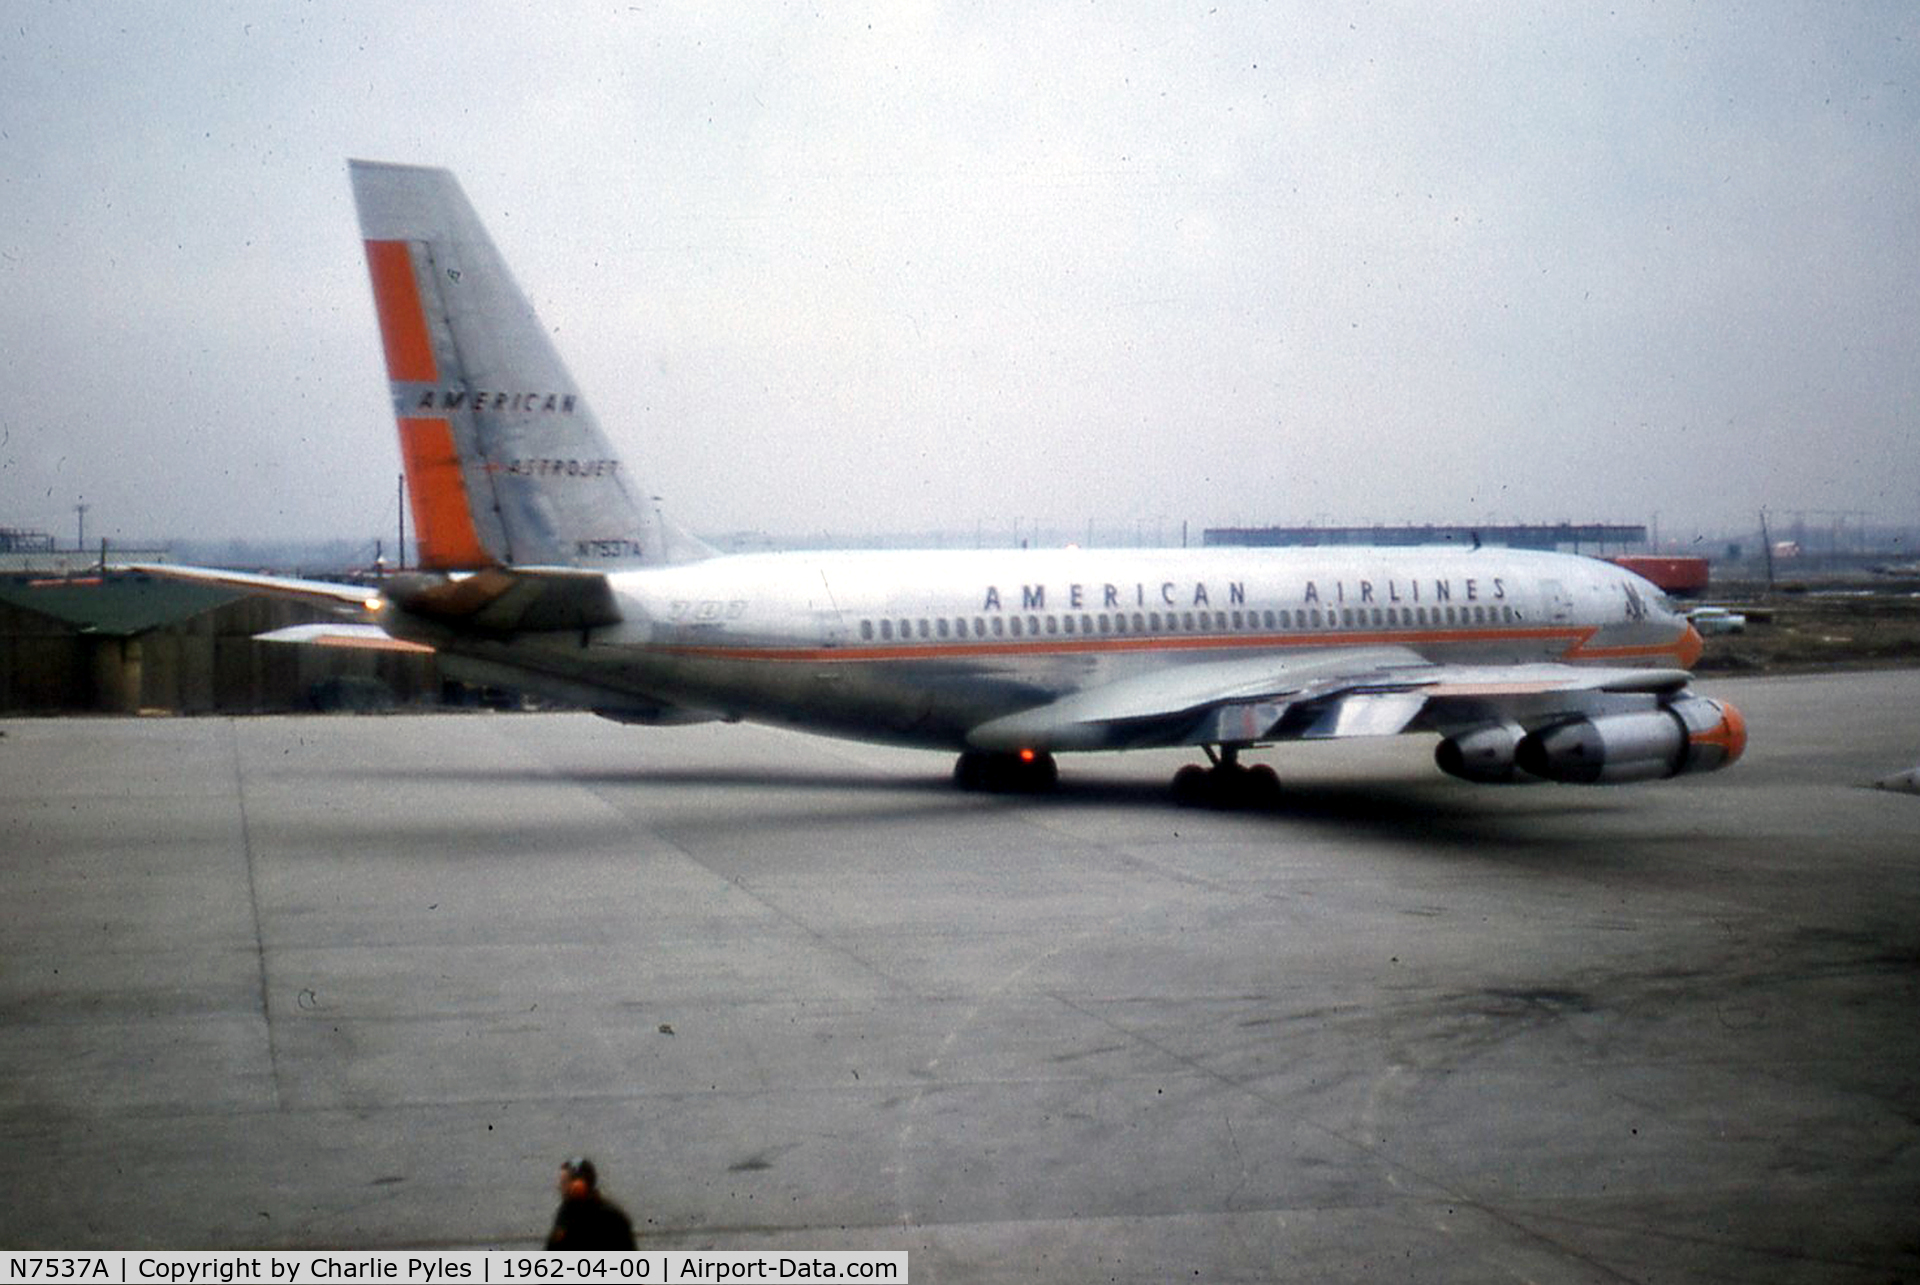 N7537A, 1961 Boeing 720-023B C/N 18023, I don't have airport info on this one.